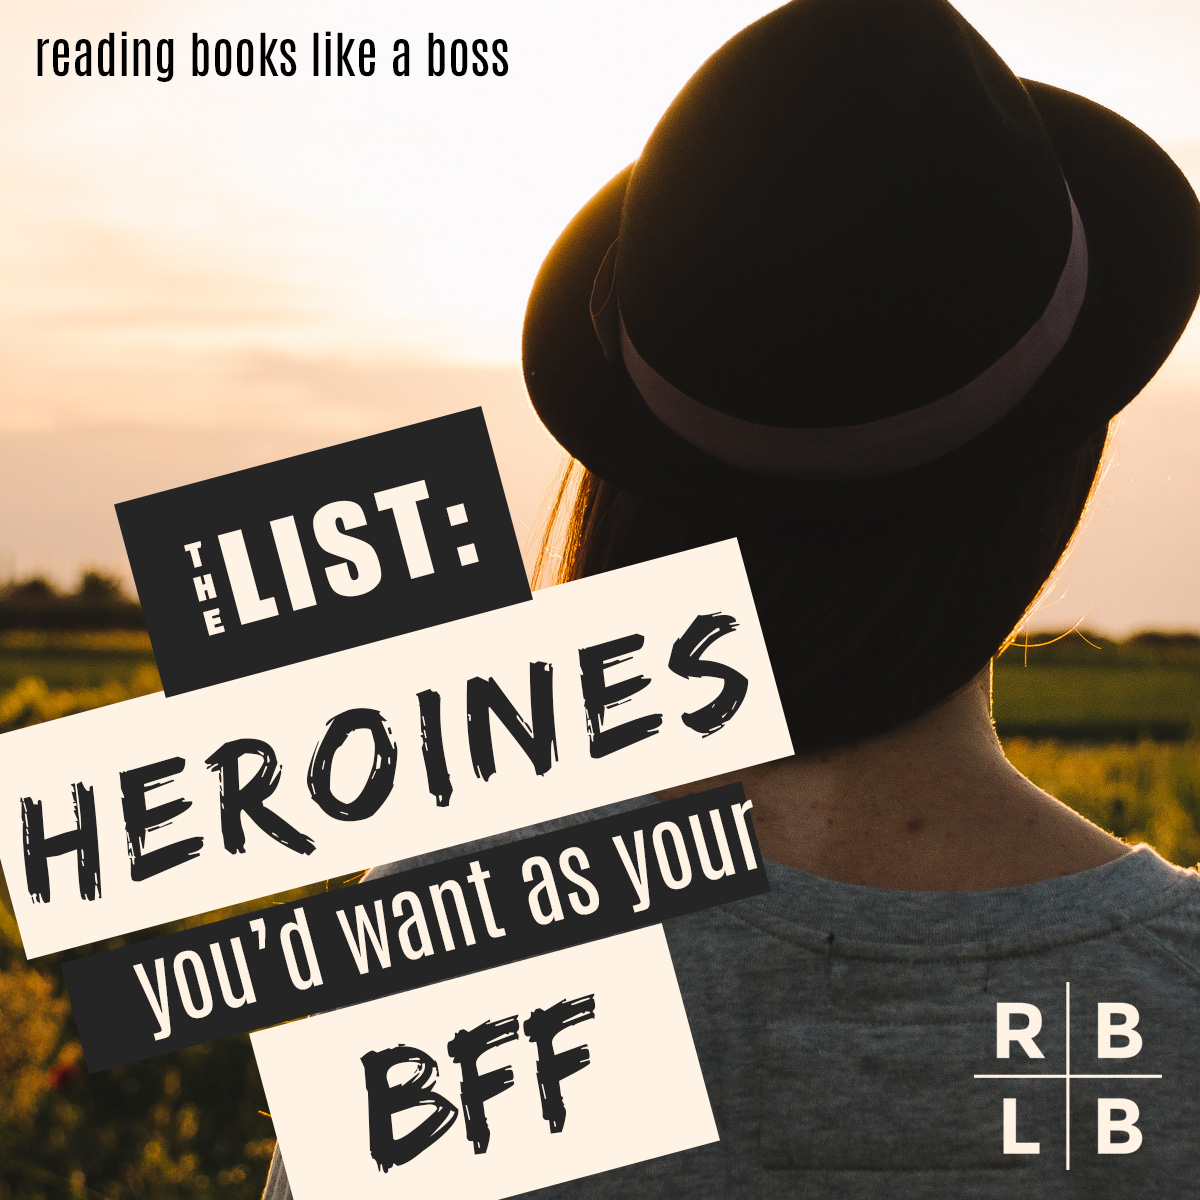 The List - Heroines You'd Want as Your BFF